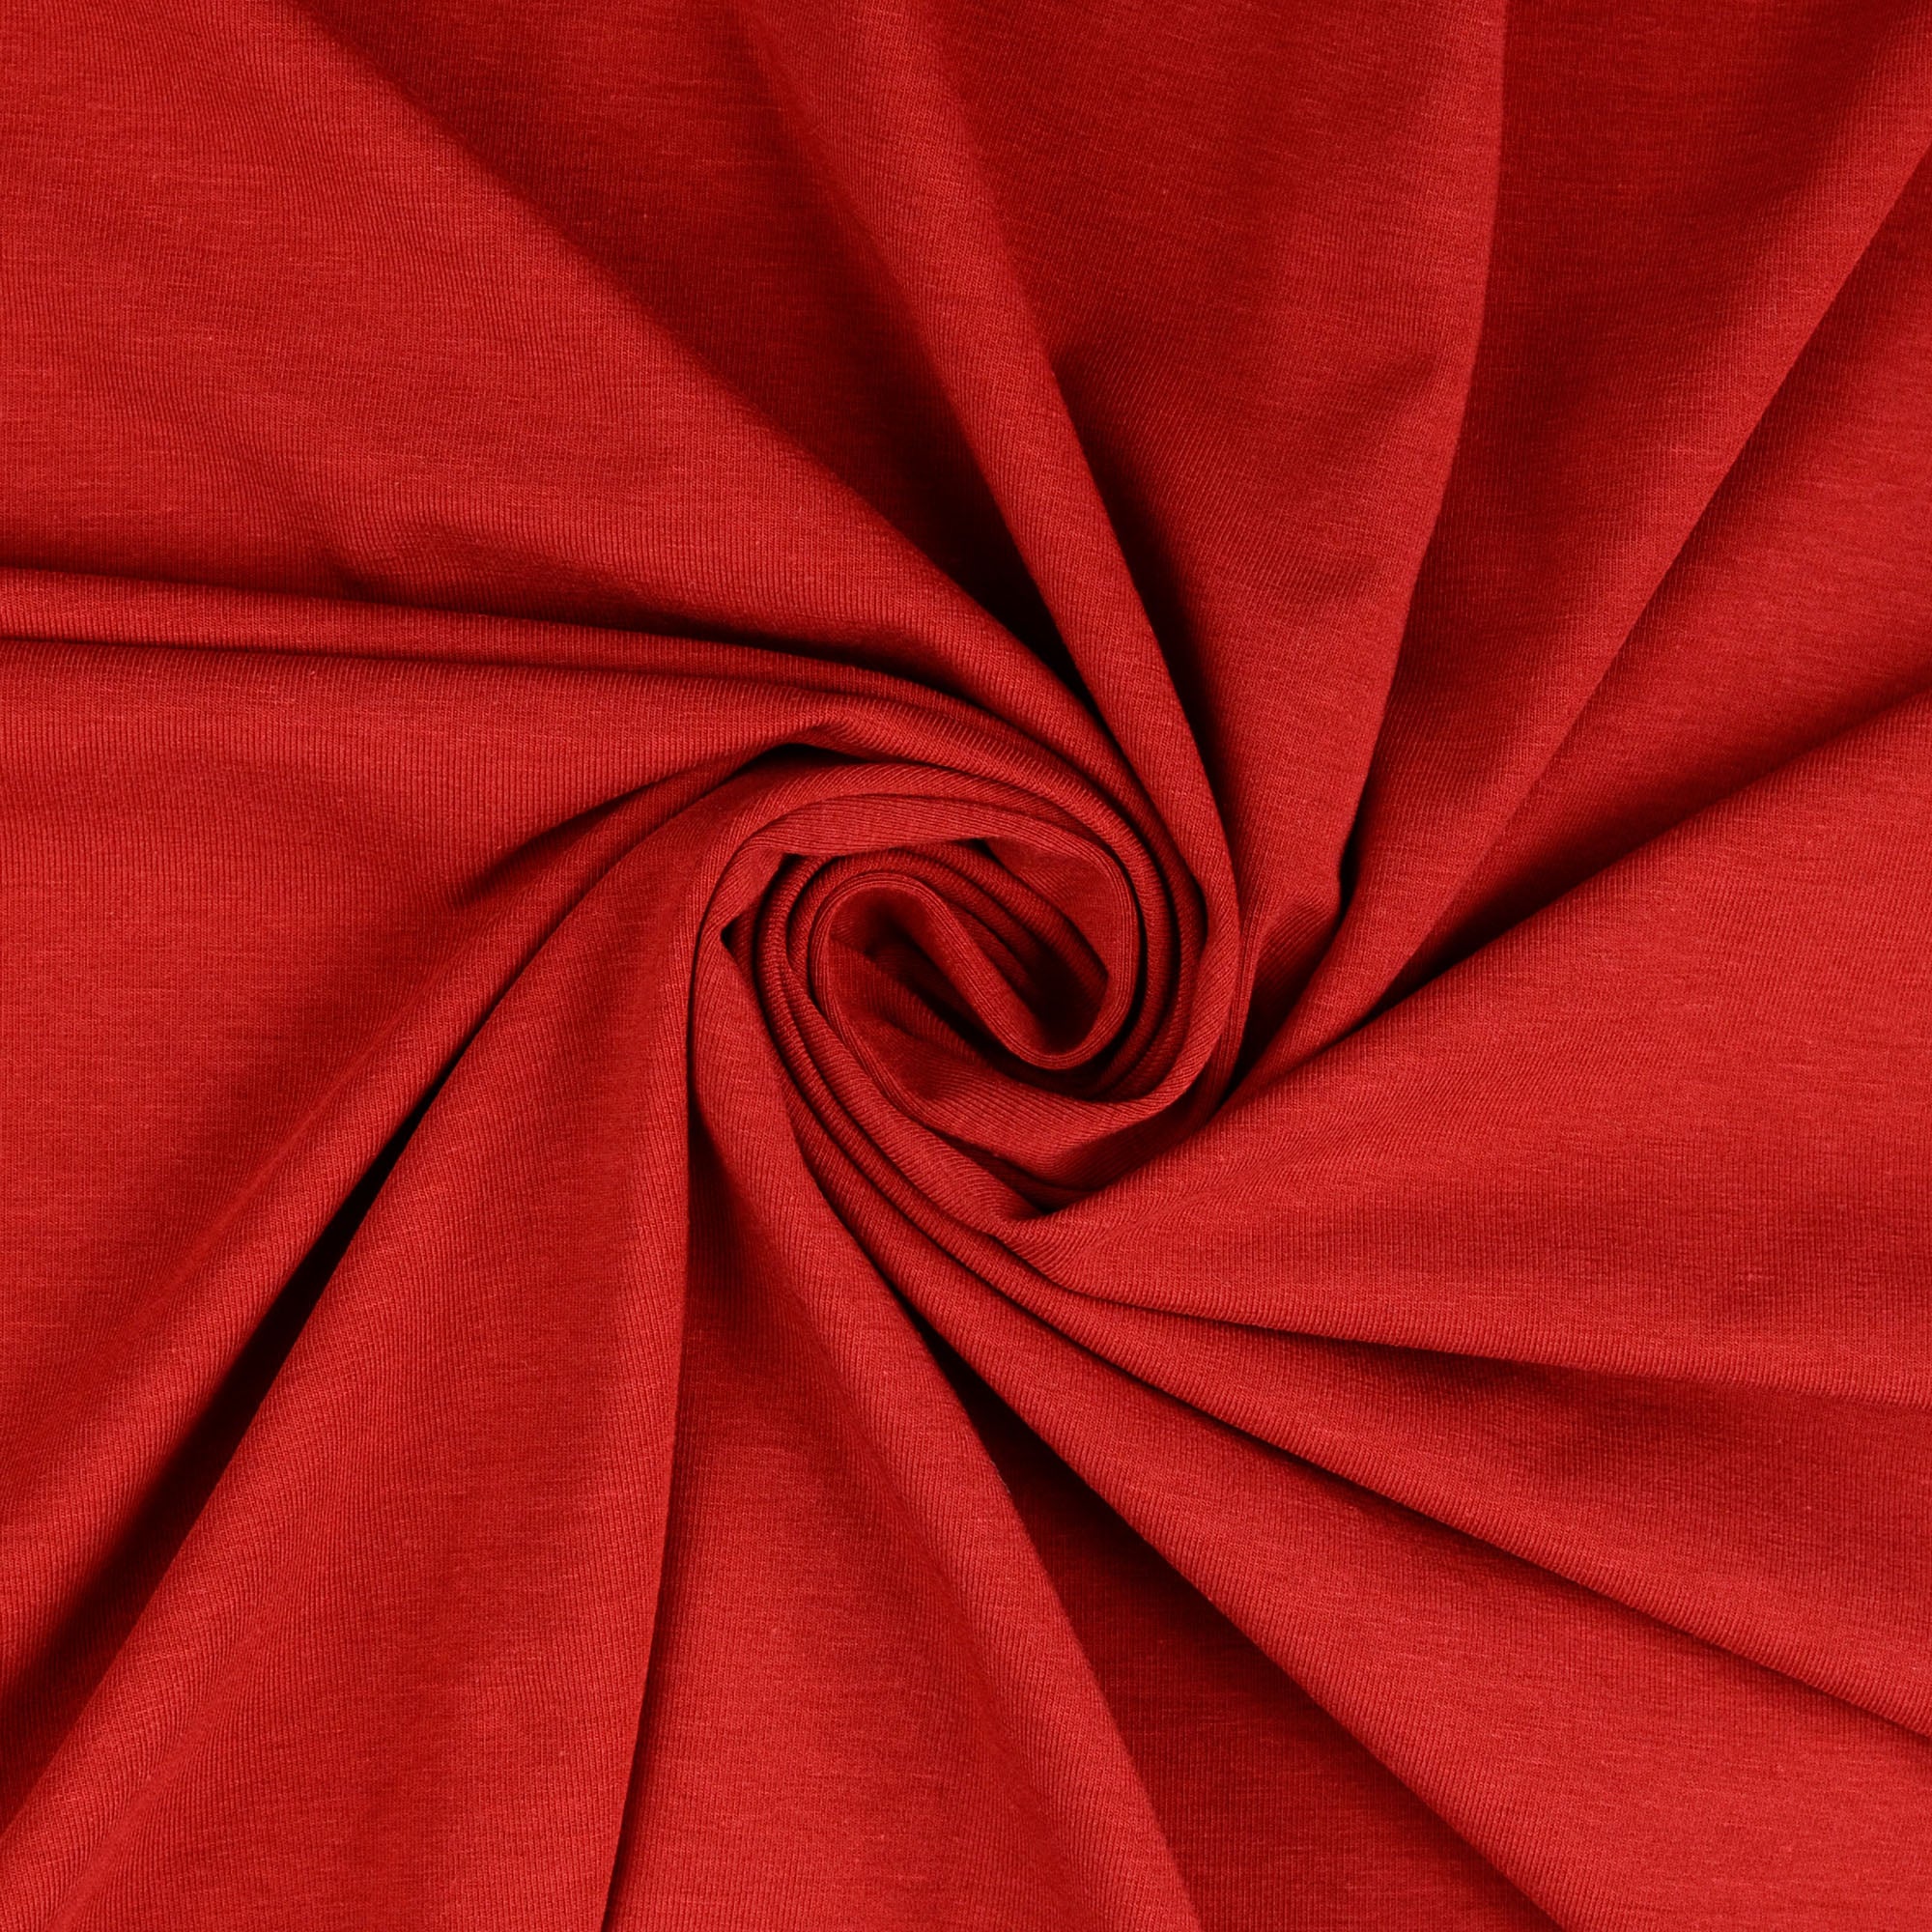 Eco Chic Red Bamboo Cotton Jersey Fabric